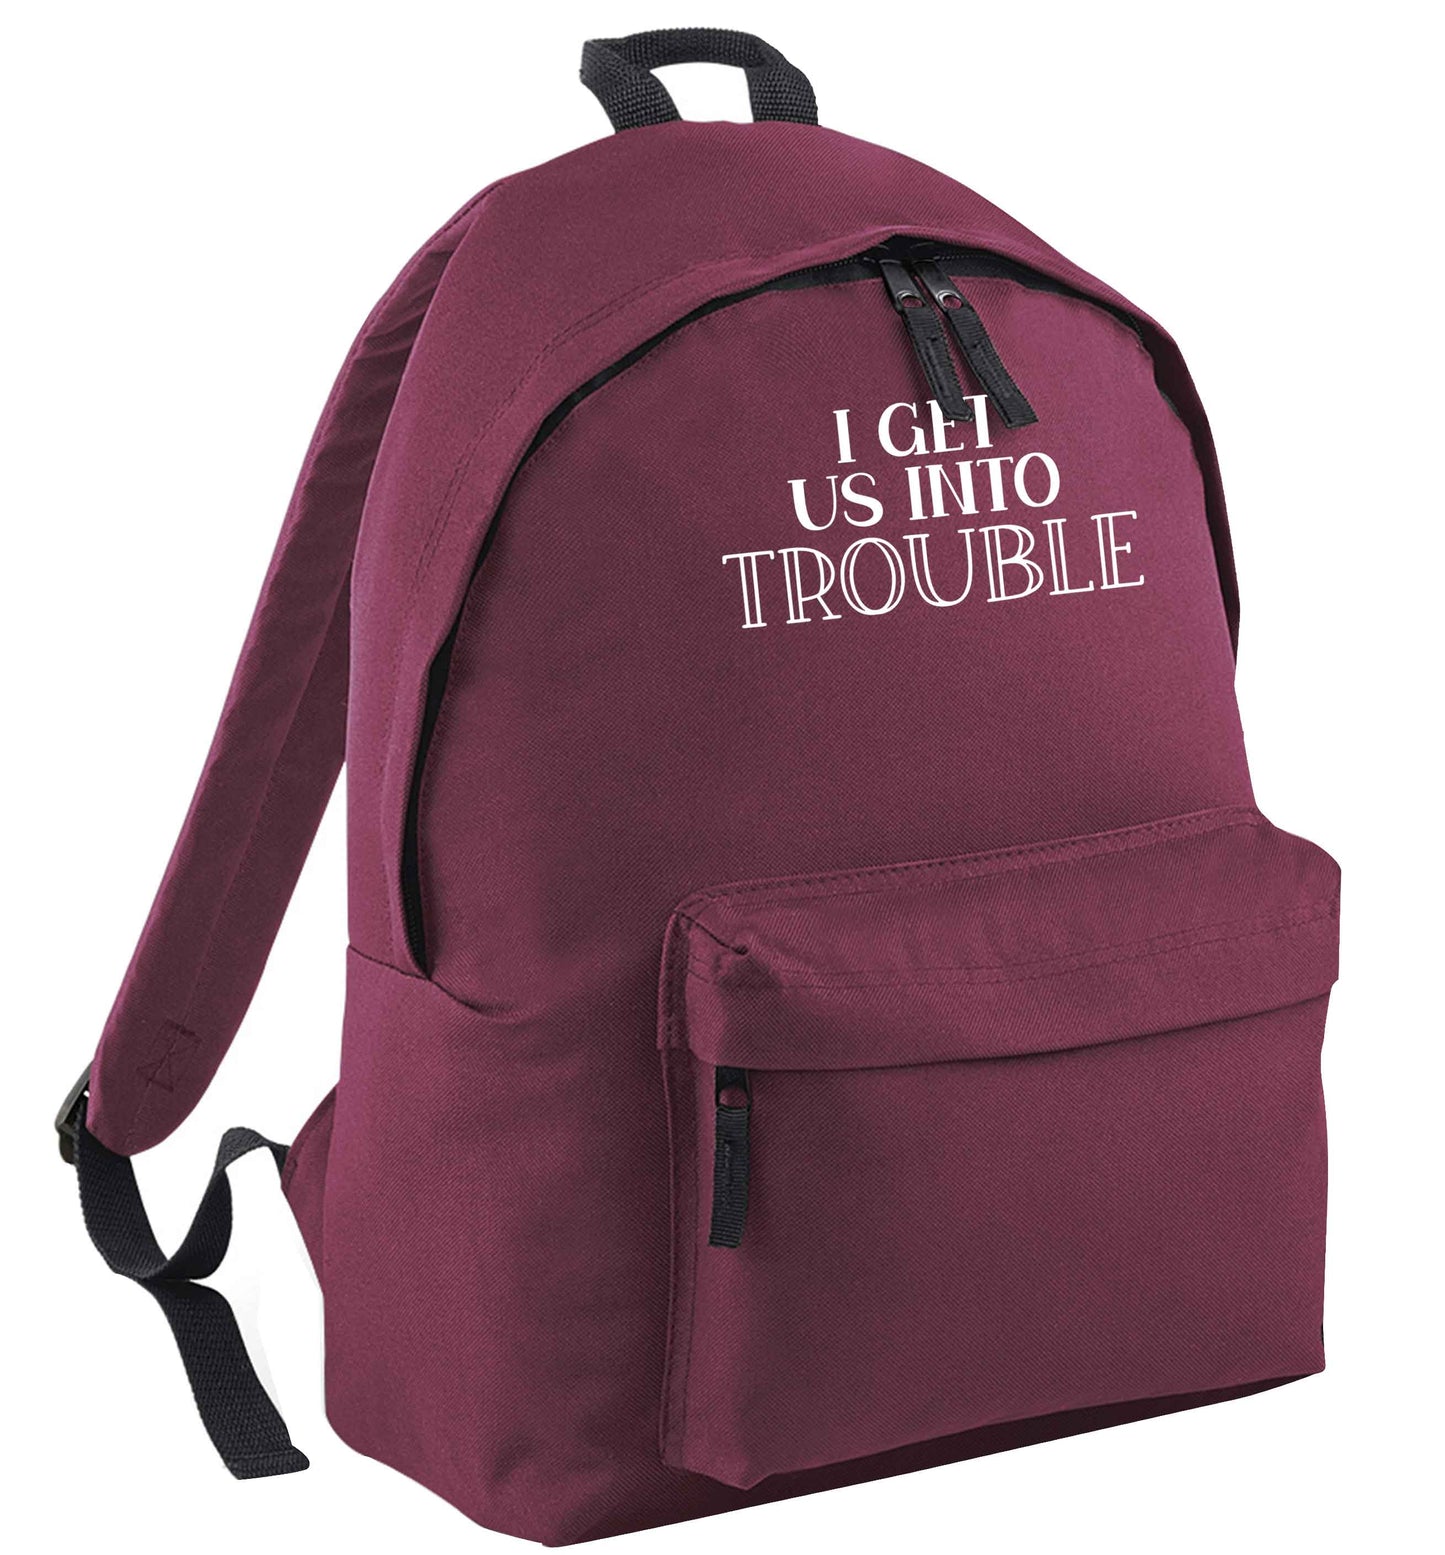 I get us into trouble | Children's backpack